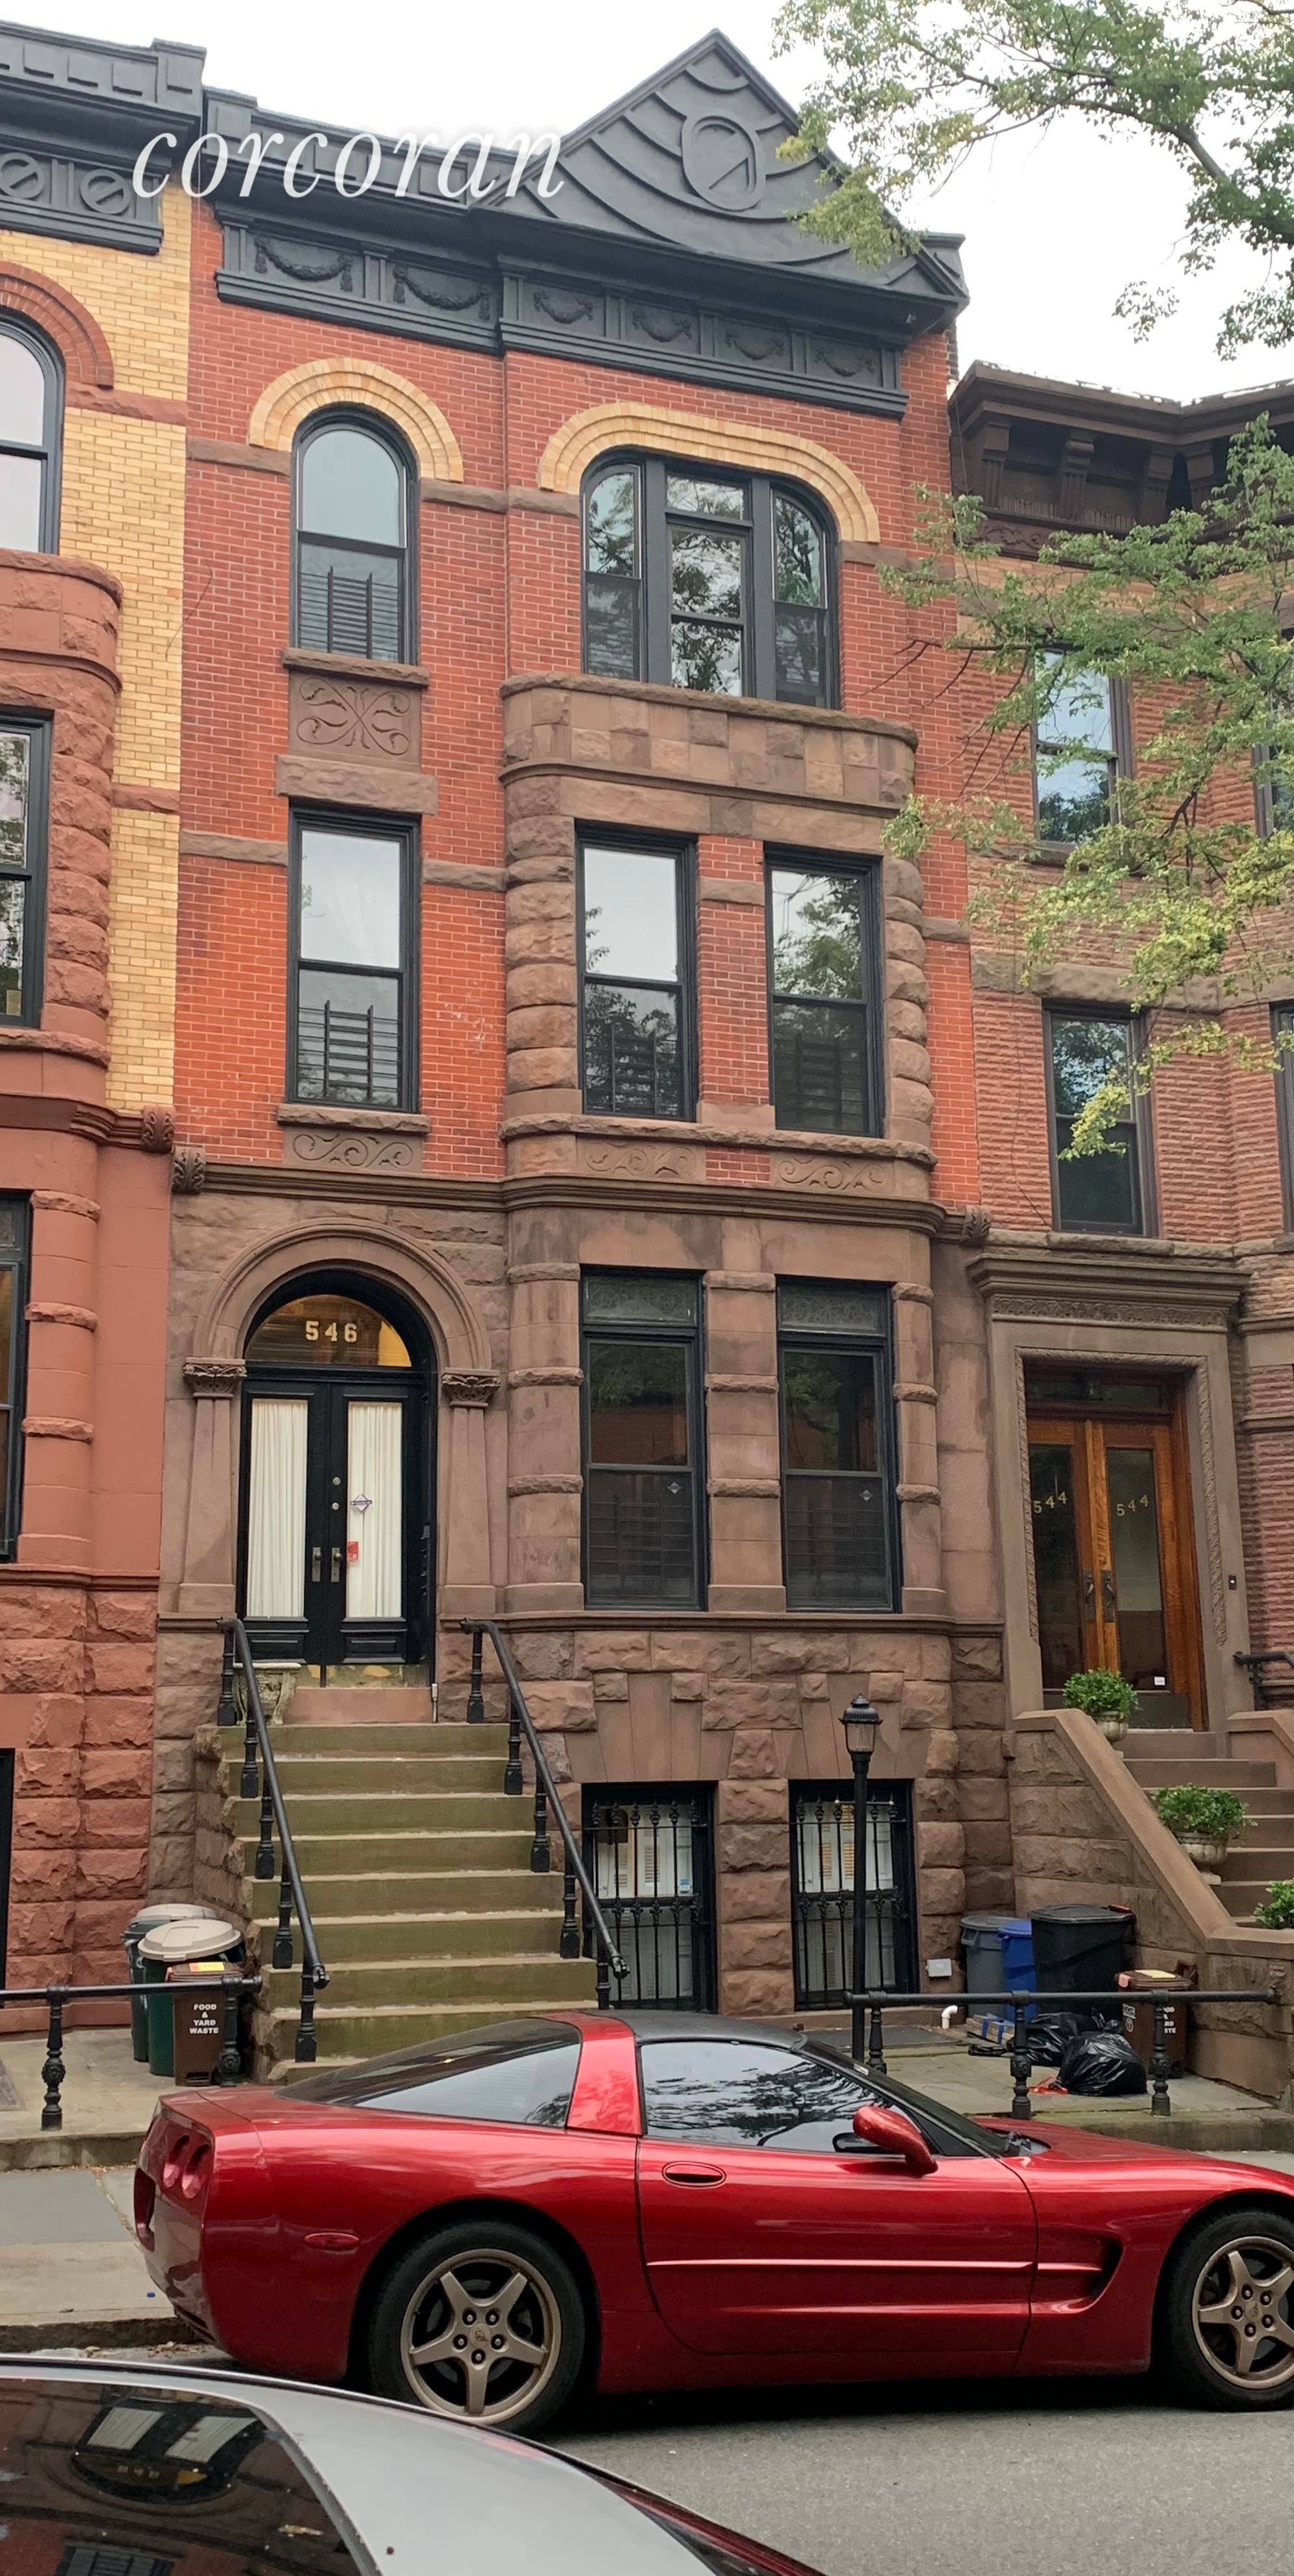 Center Slope TOWNHOUSE Upper TRIPLEX RENTALCENTER SLOPE TOWNHOUSE RENTAL Enjoy three full floors of gracious townhouse living in this 20' wide renovated Victorian brownstone triplex with loads of original detail ...